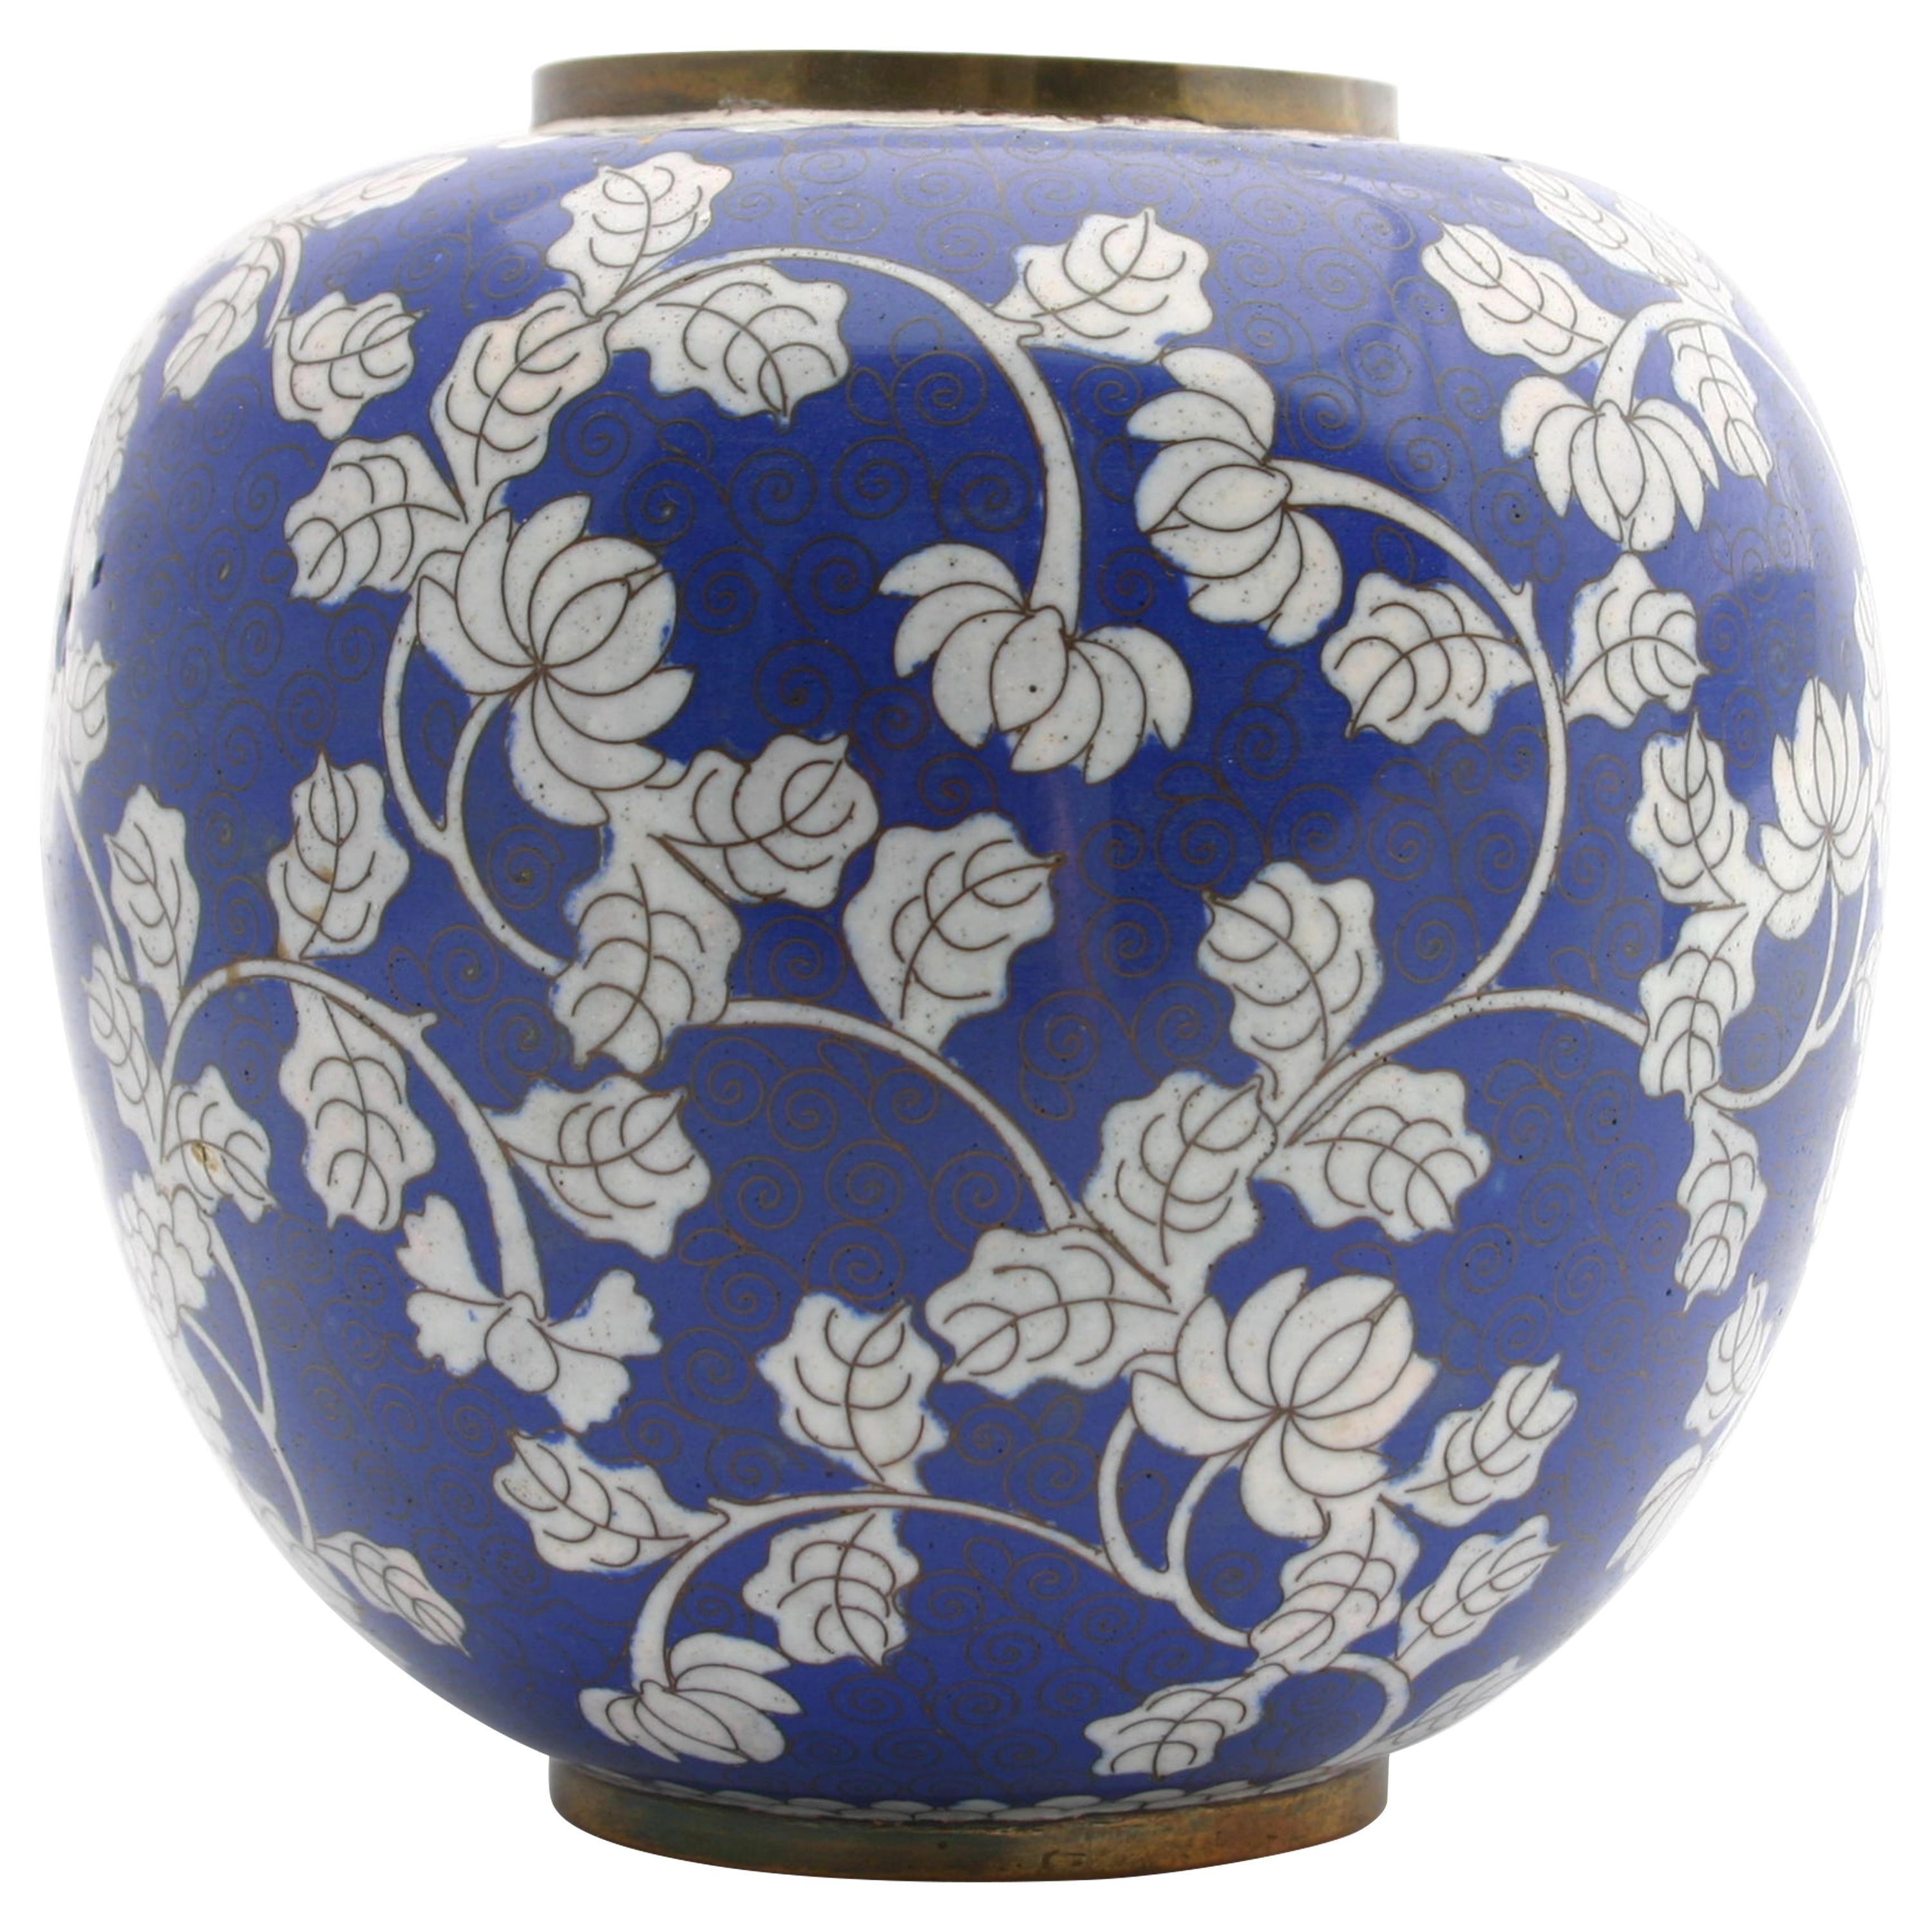 Antique Blue and White Chinese Cloisonné Chrysanthemum Ginger Jar